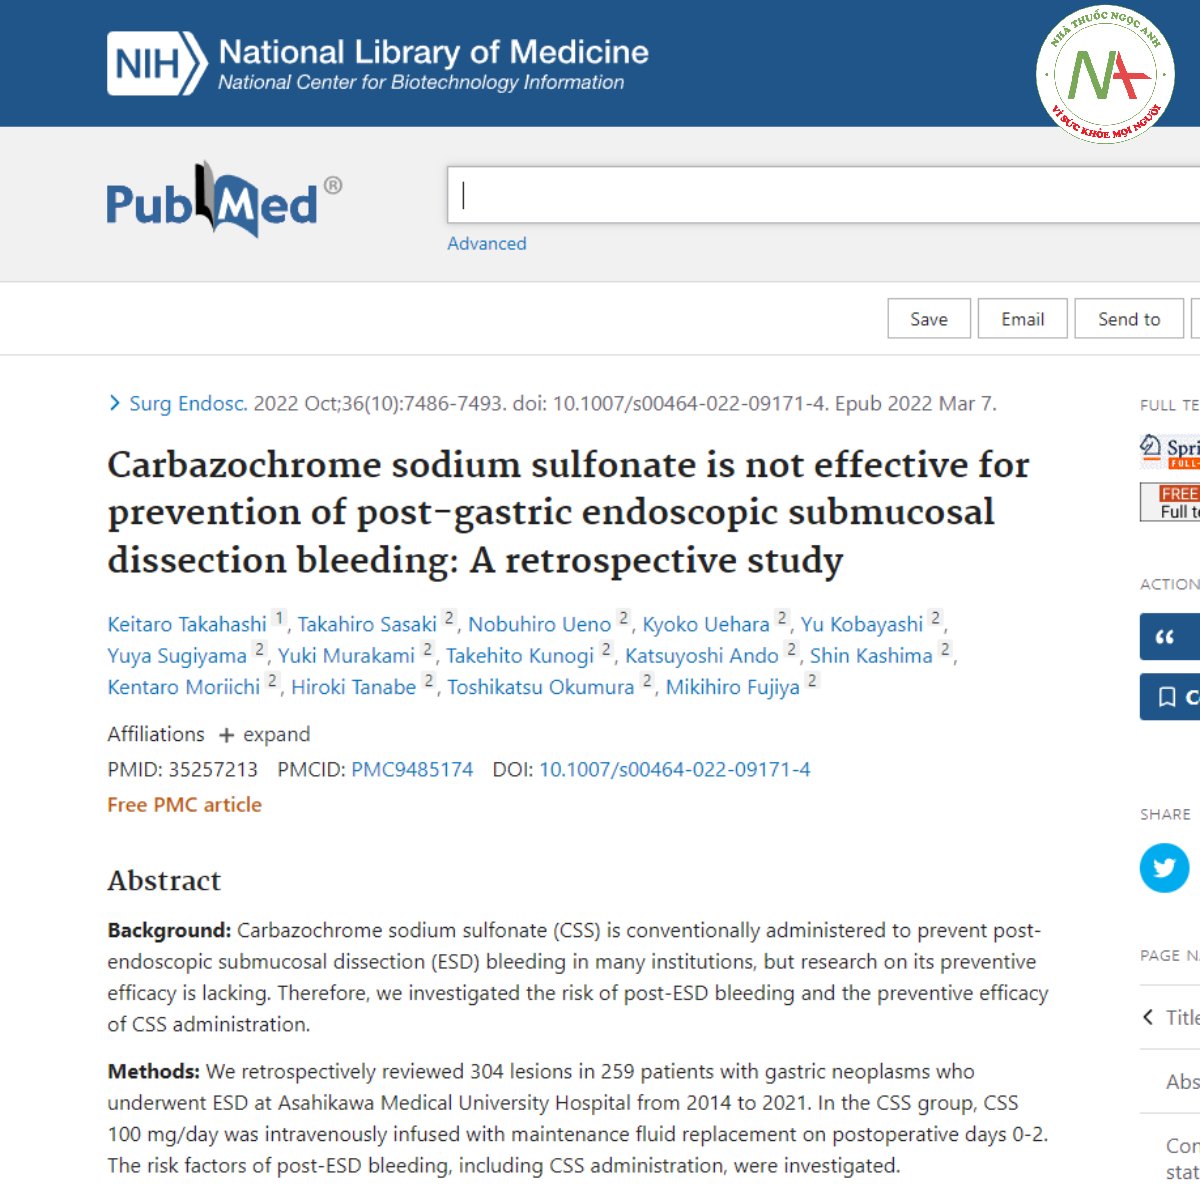 Carbazochrome sodium sulfonate is not effective for prevention of post-gastric endoscopic submucosal dissection bleeding_ A retrospective study